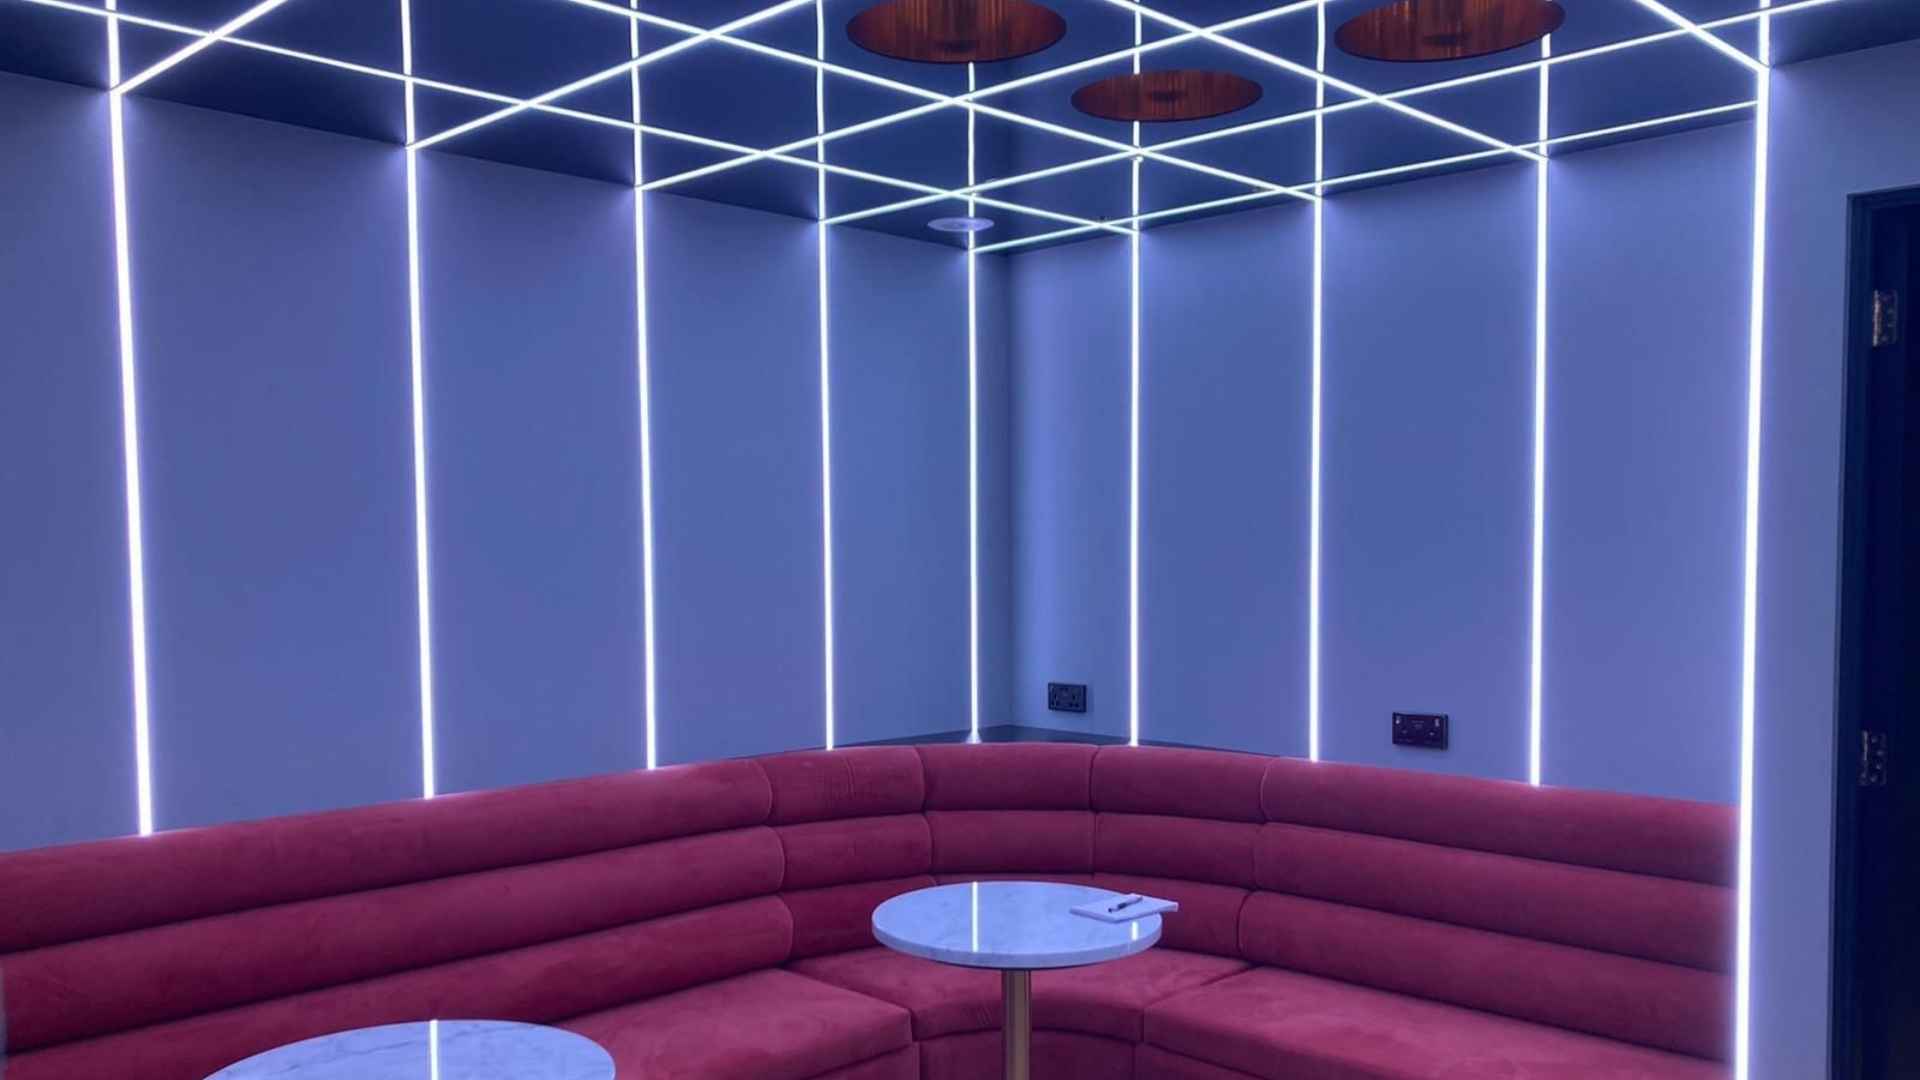 the cube bespoke lighting and seating area inside the ao arena's executive suite